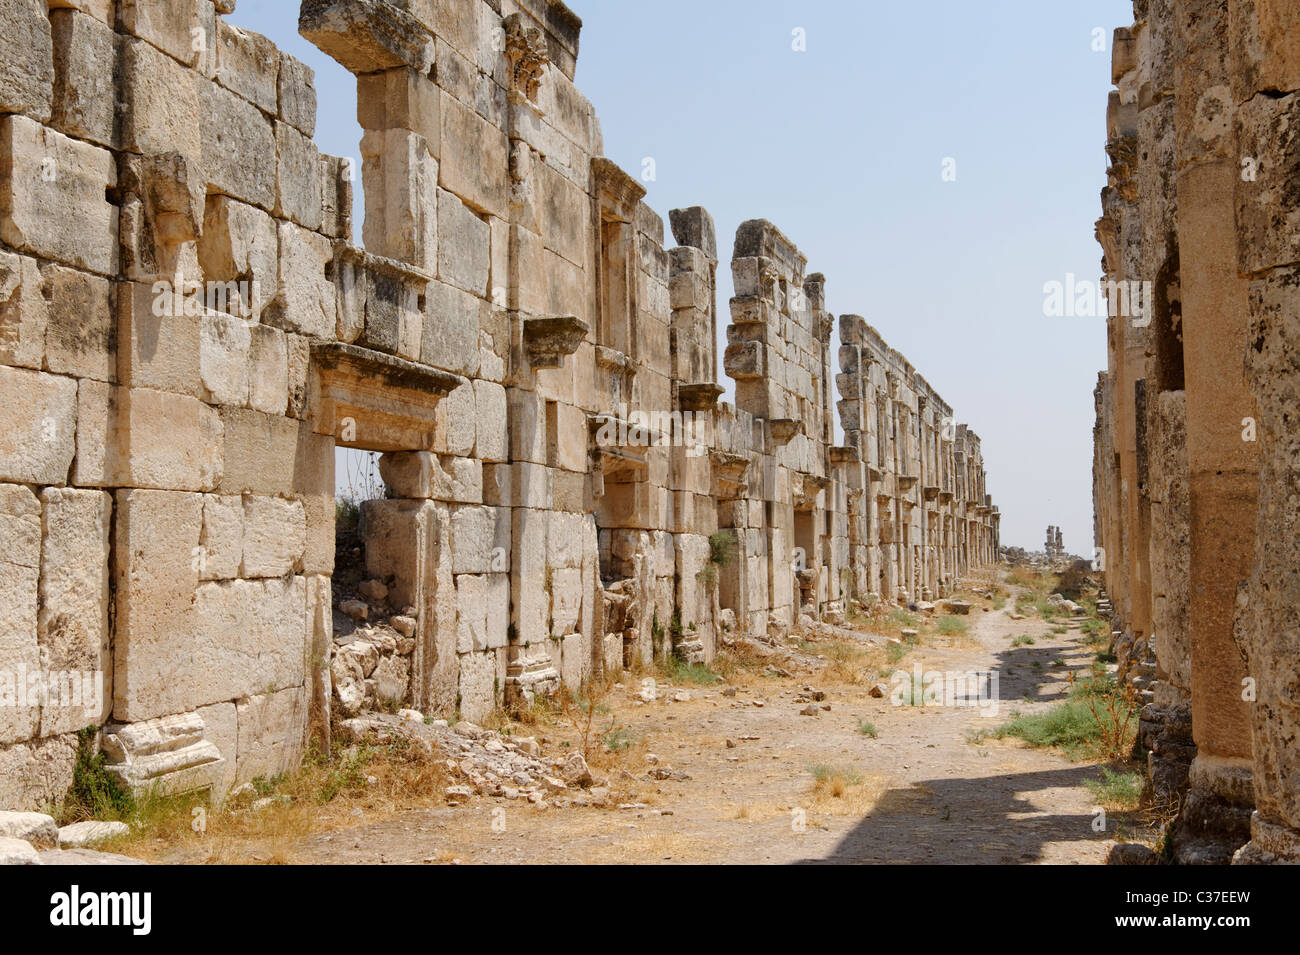 Majestic Colonnaded Street of the ancient city of Apamea with shop facades behind the columns. Stock Photo